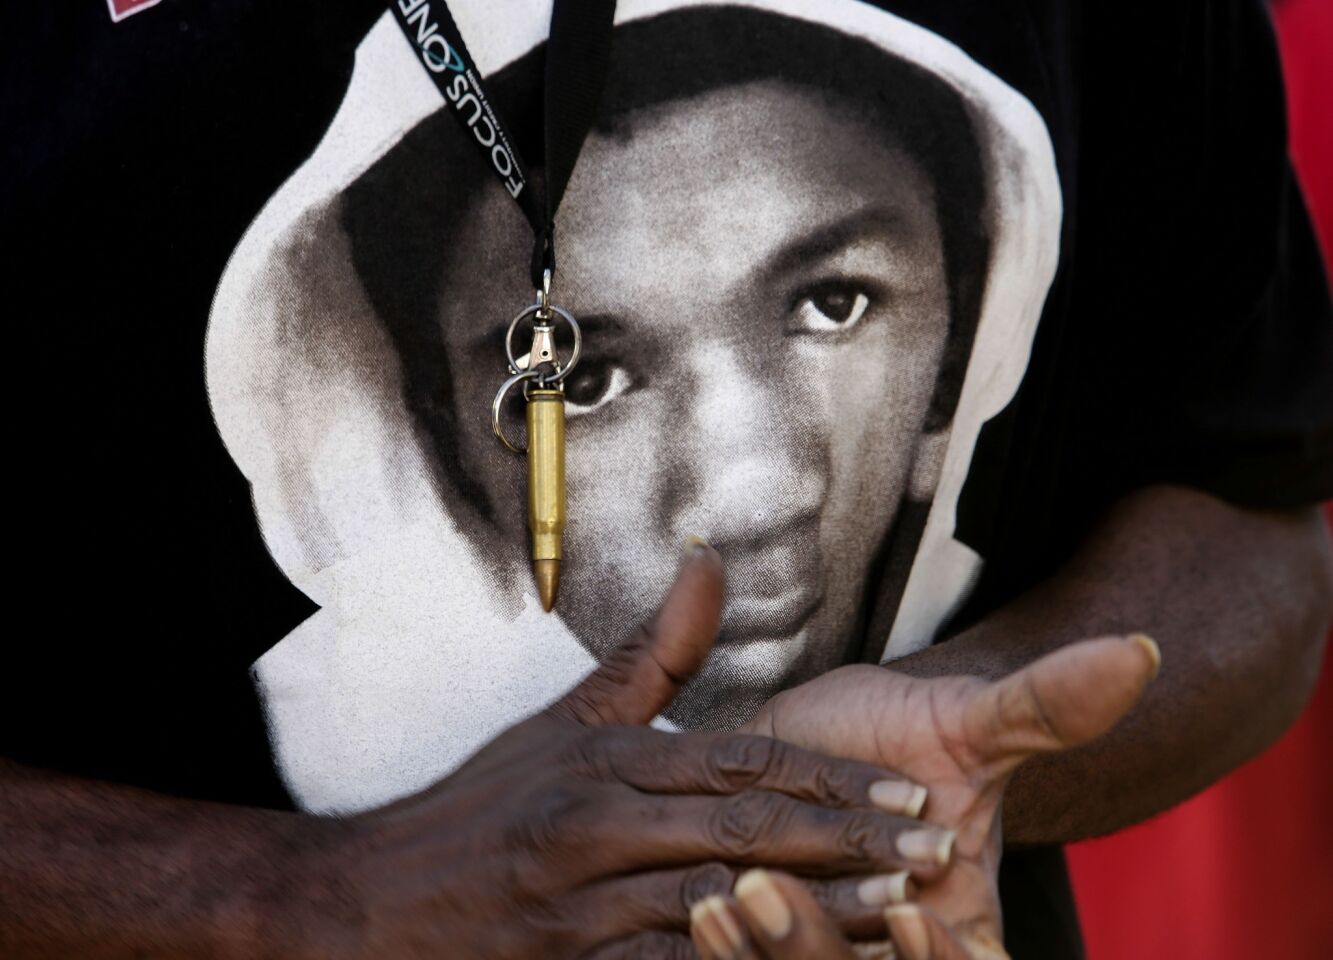 A participant in a rally Monday wears a Trayvon Martin T-shirt and a bullet pendant, in protest of the acquittal of George Zimmerman.